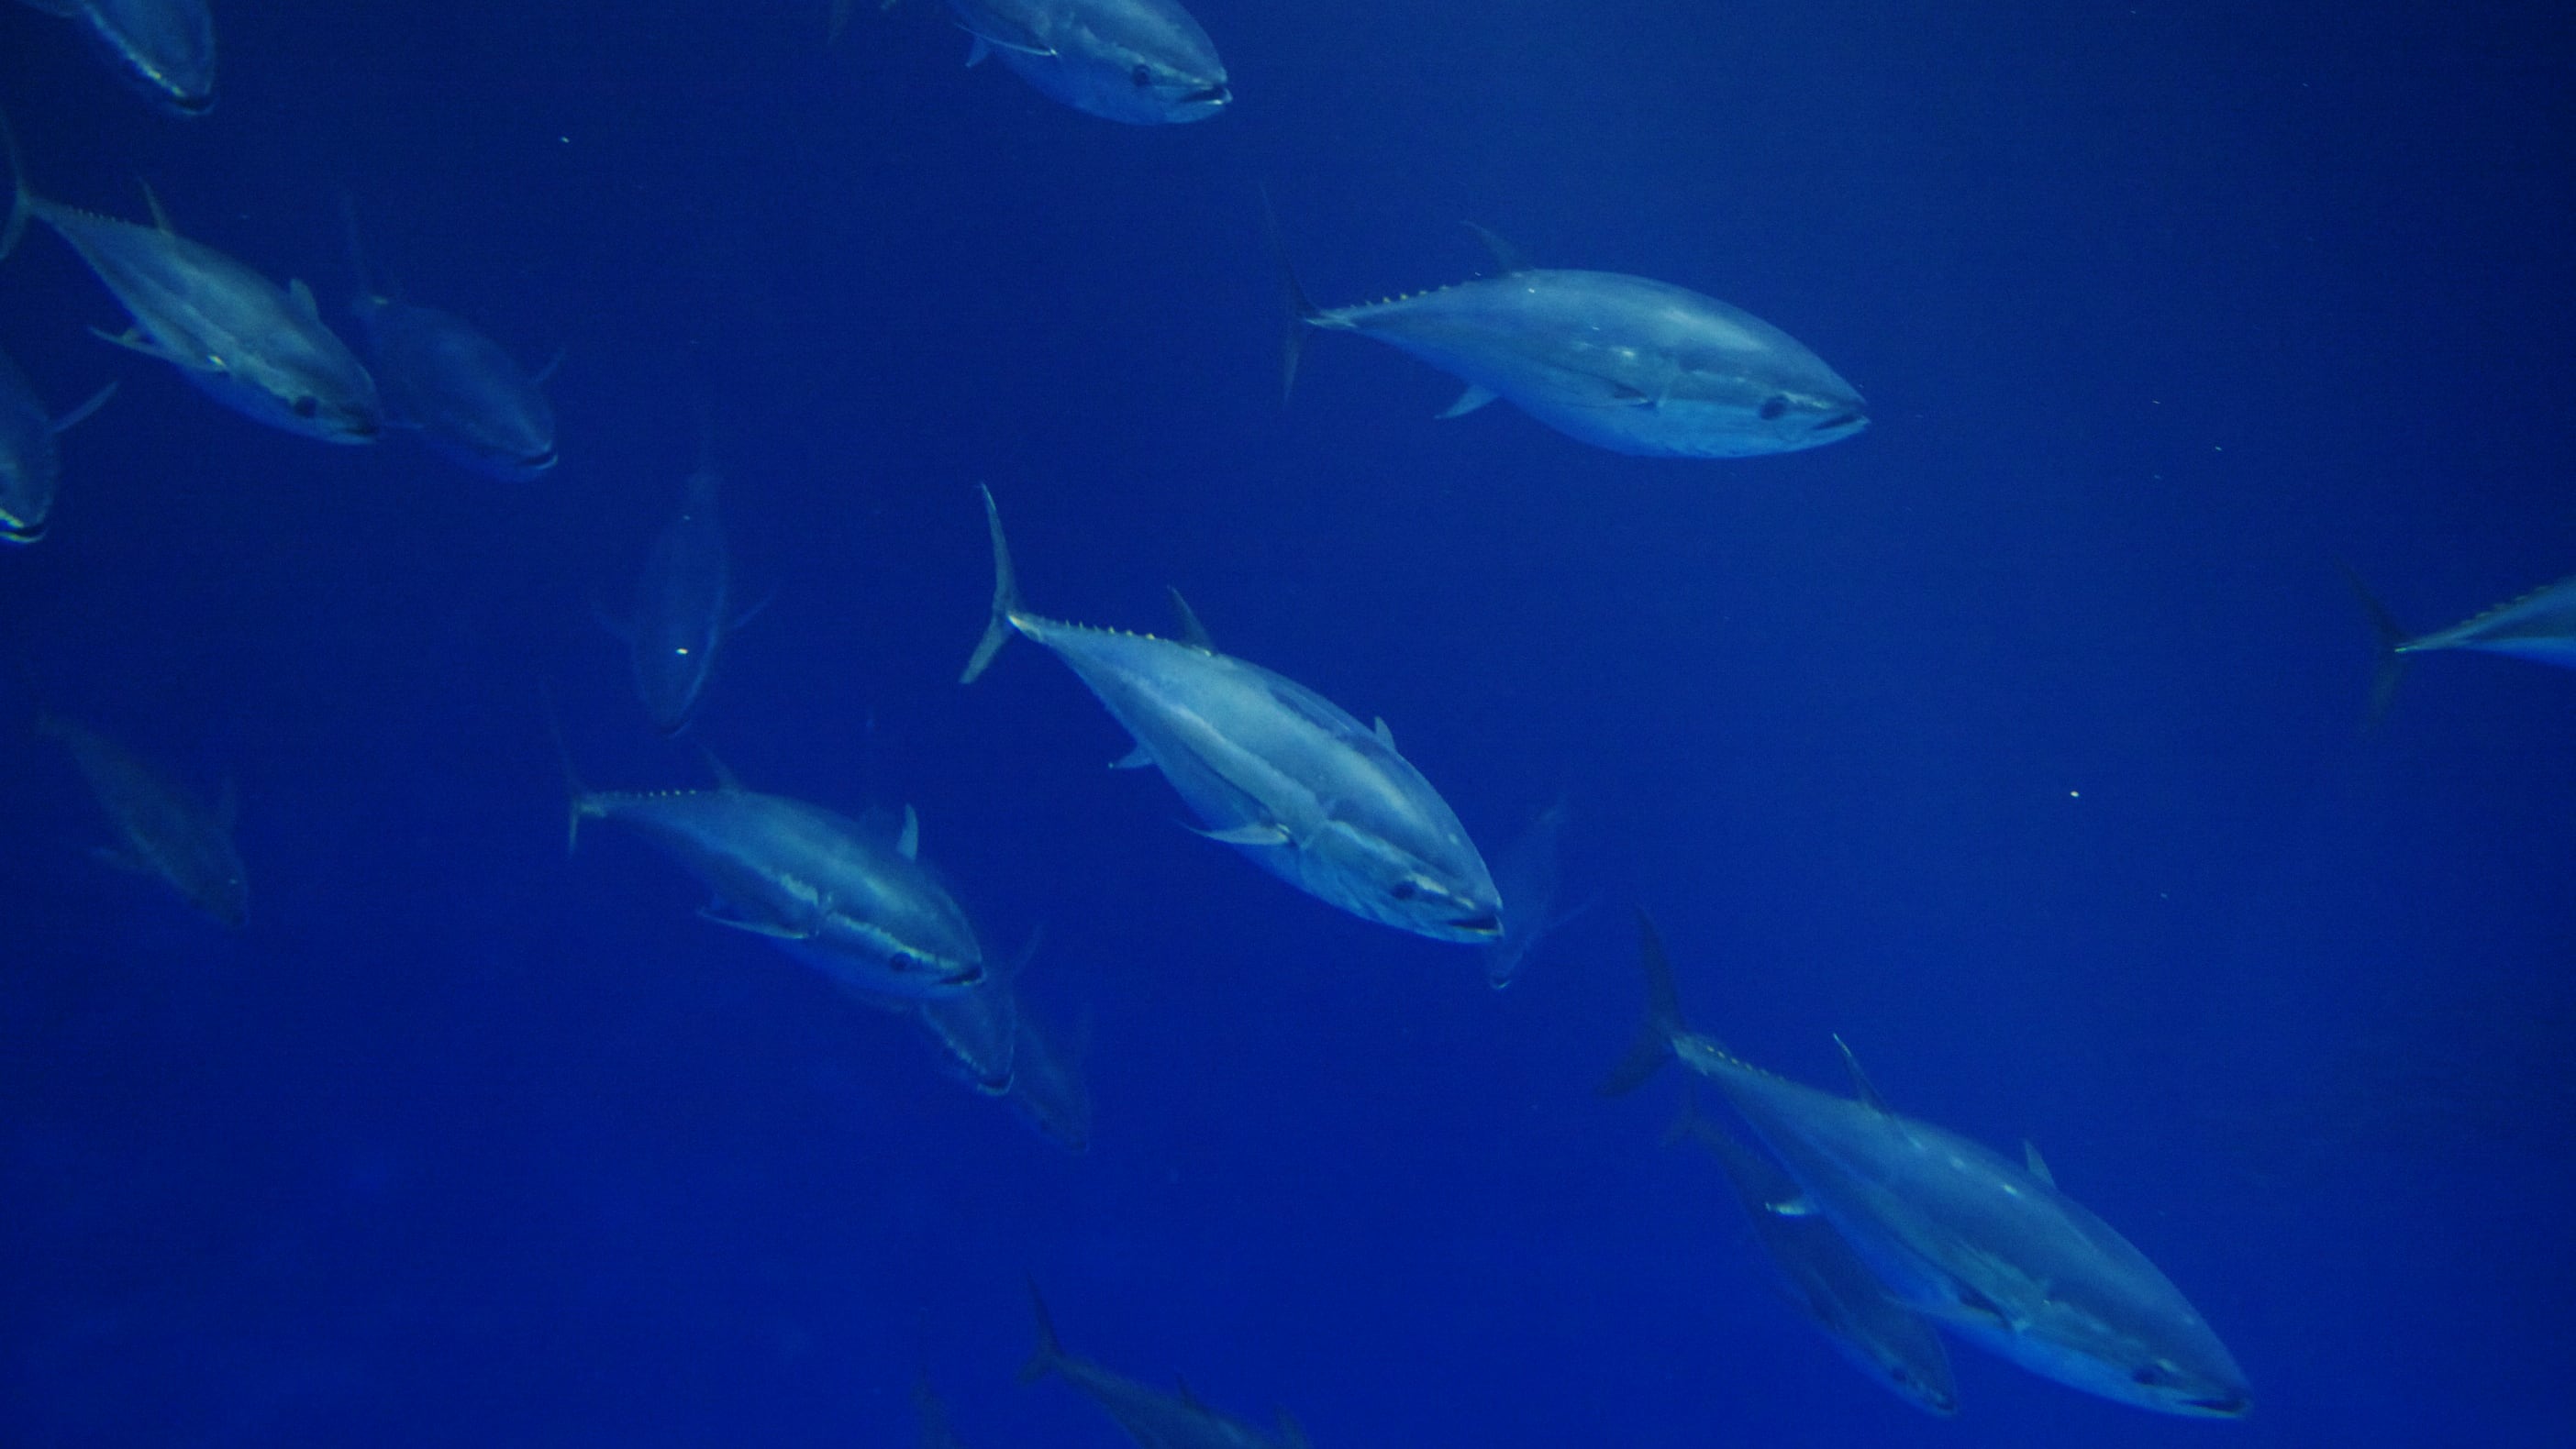 will farmed fish save our oceans, delight our palates, and provide healthy food for all?